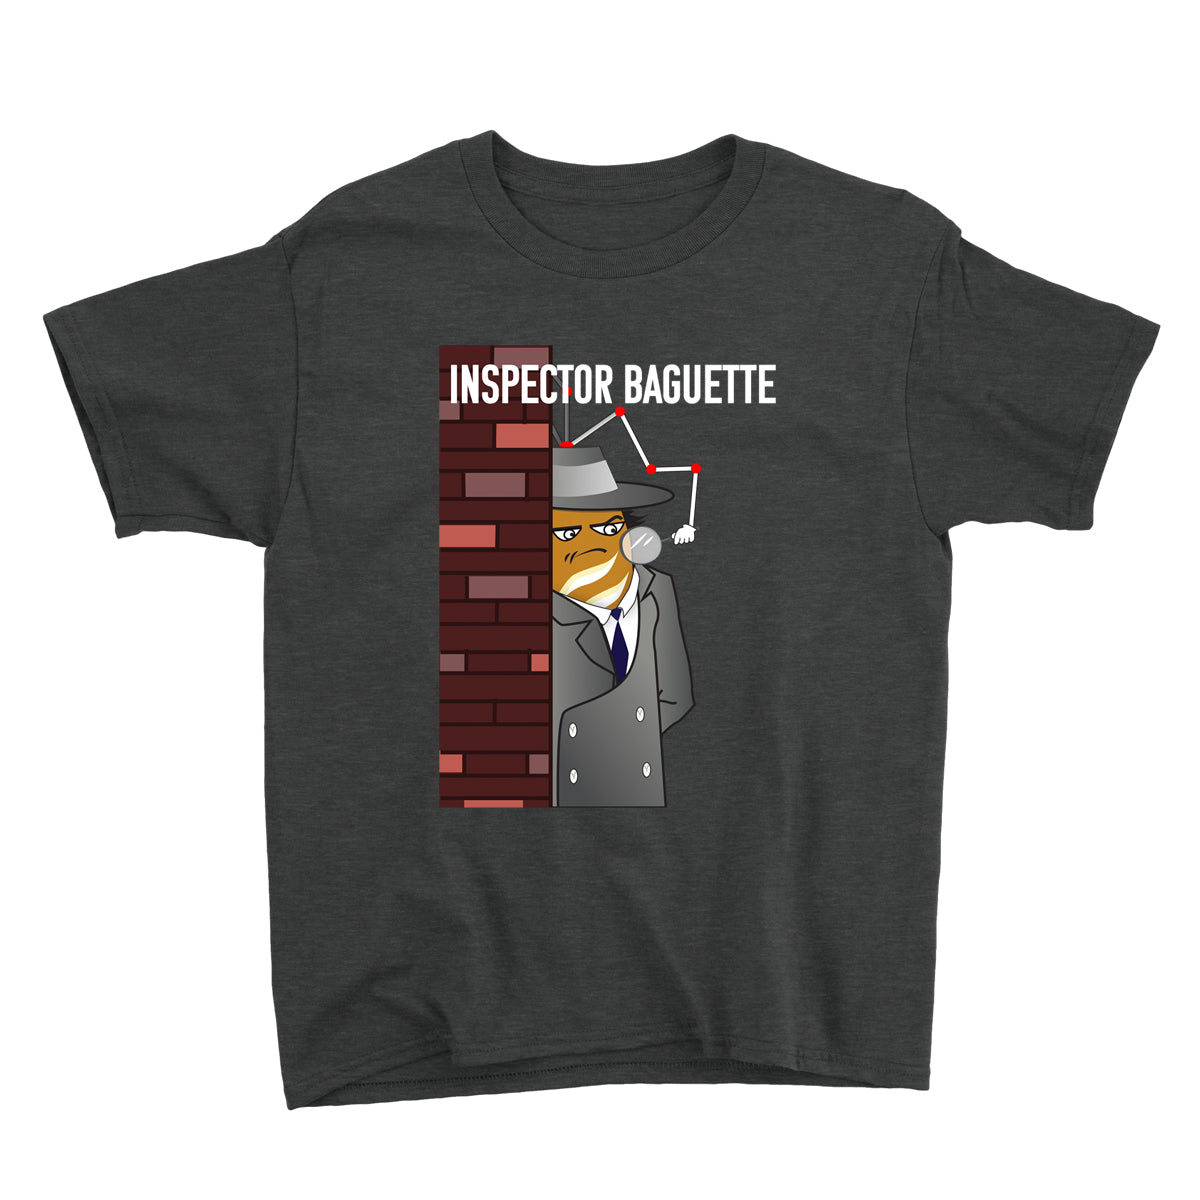 Movie The Food™ "Inspector Baguette" Kid's T-Shirt